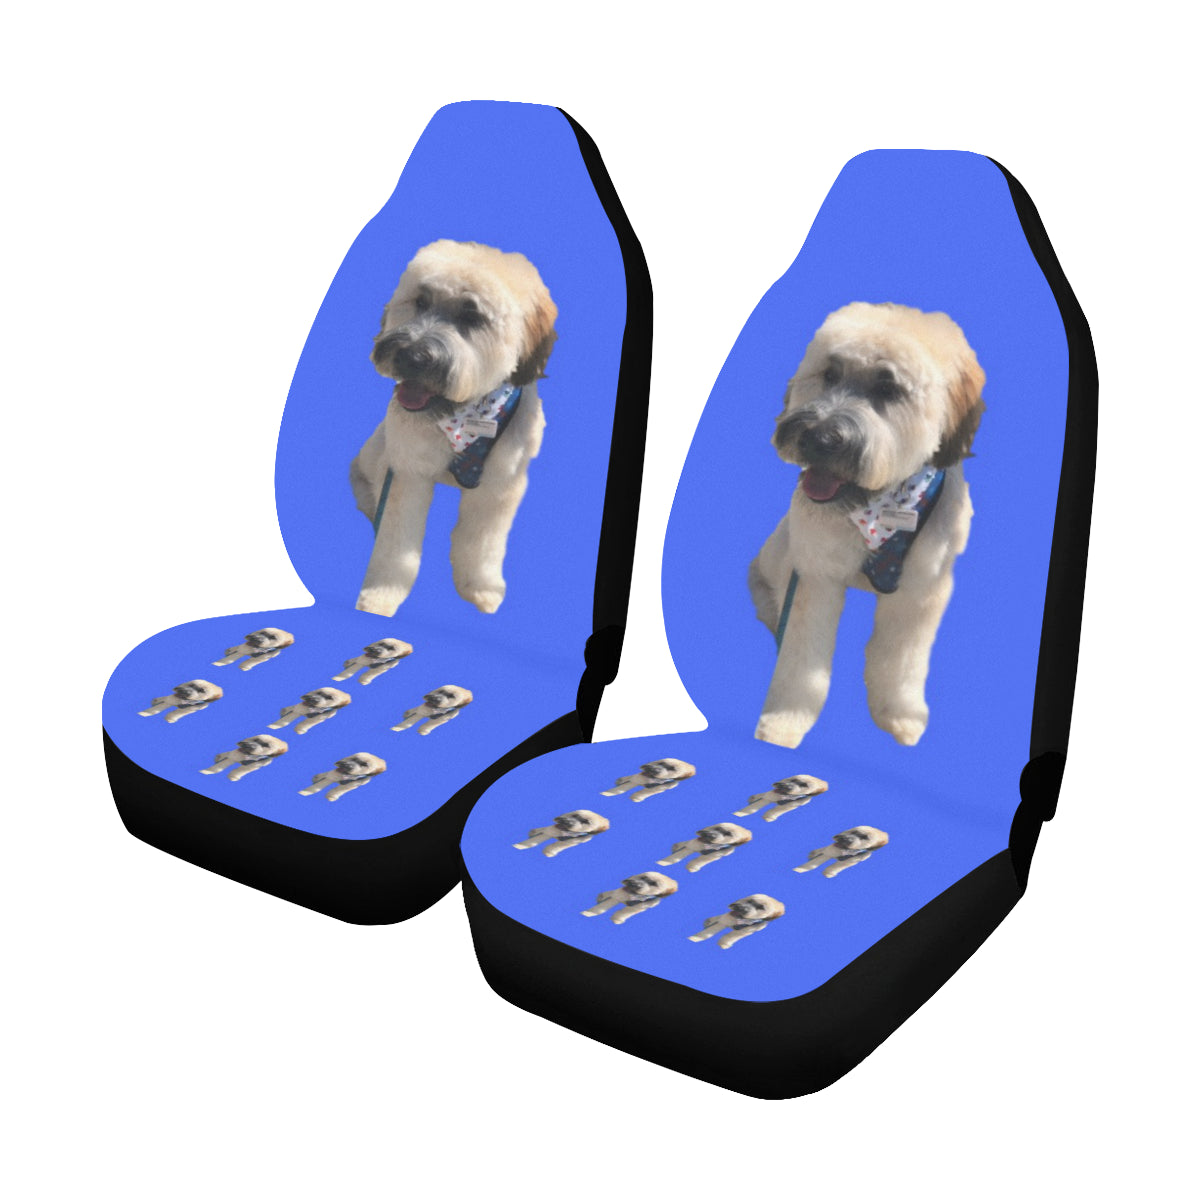 Wheaten Terrier Car Seat Covers (Set of 2)